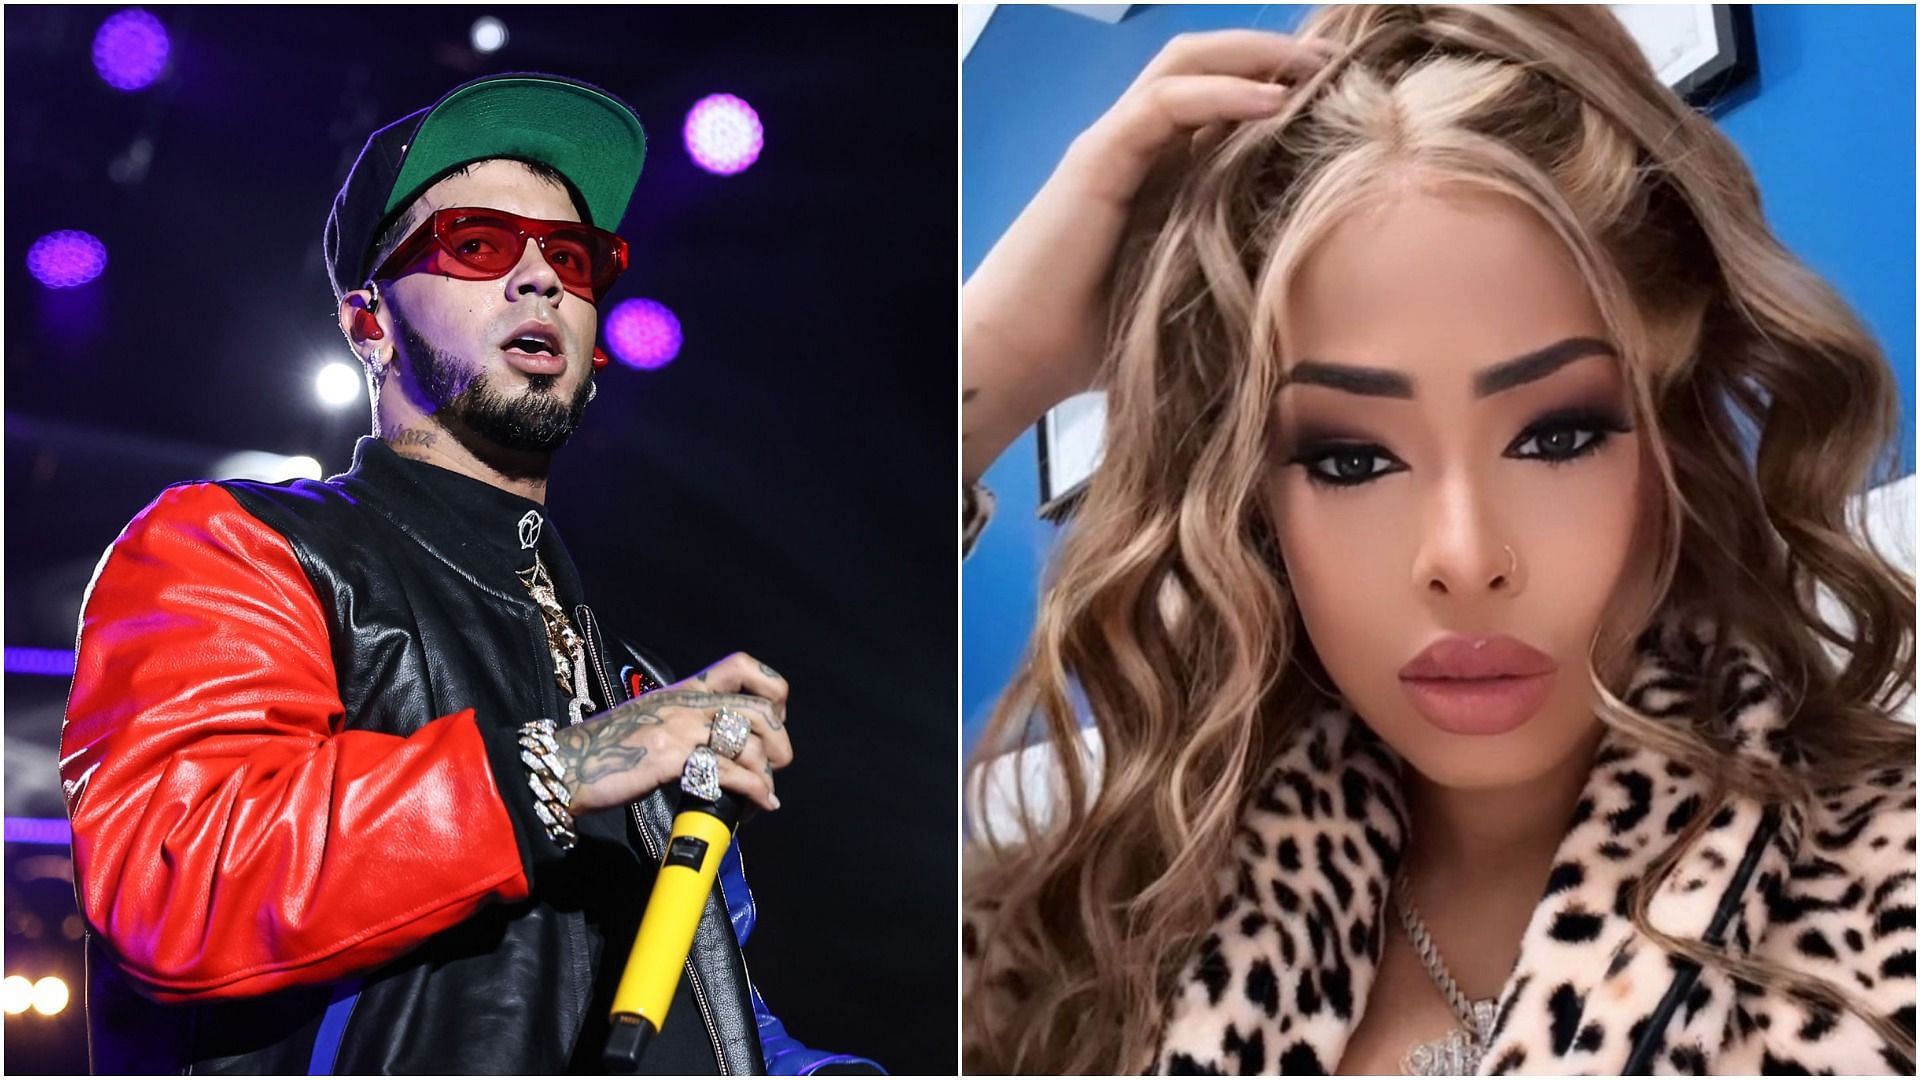 Anuel AA and Yailin La M&aacute;s are seemingly engaged according to a video (Images via John Parra/Getty Images and yailinlamasviralreal/Instagram)